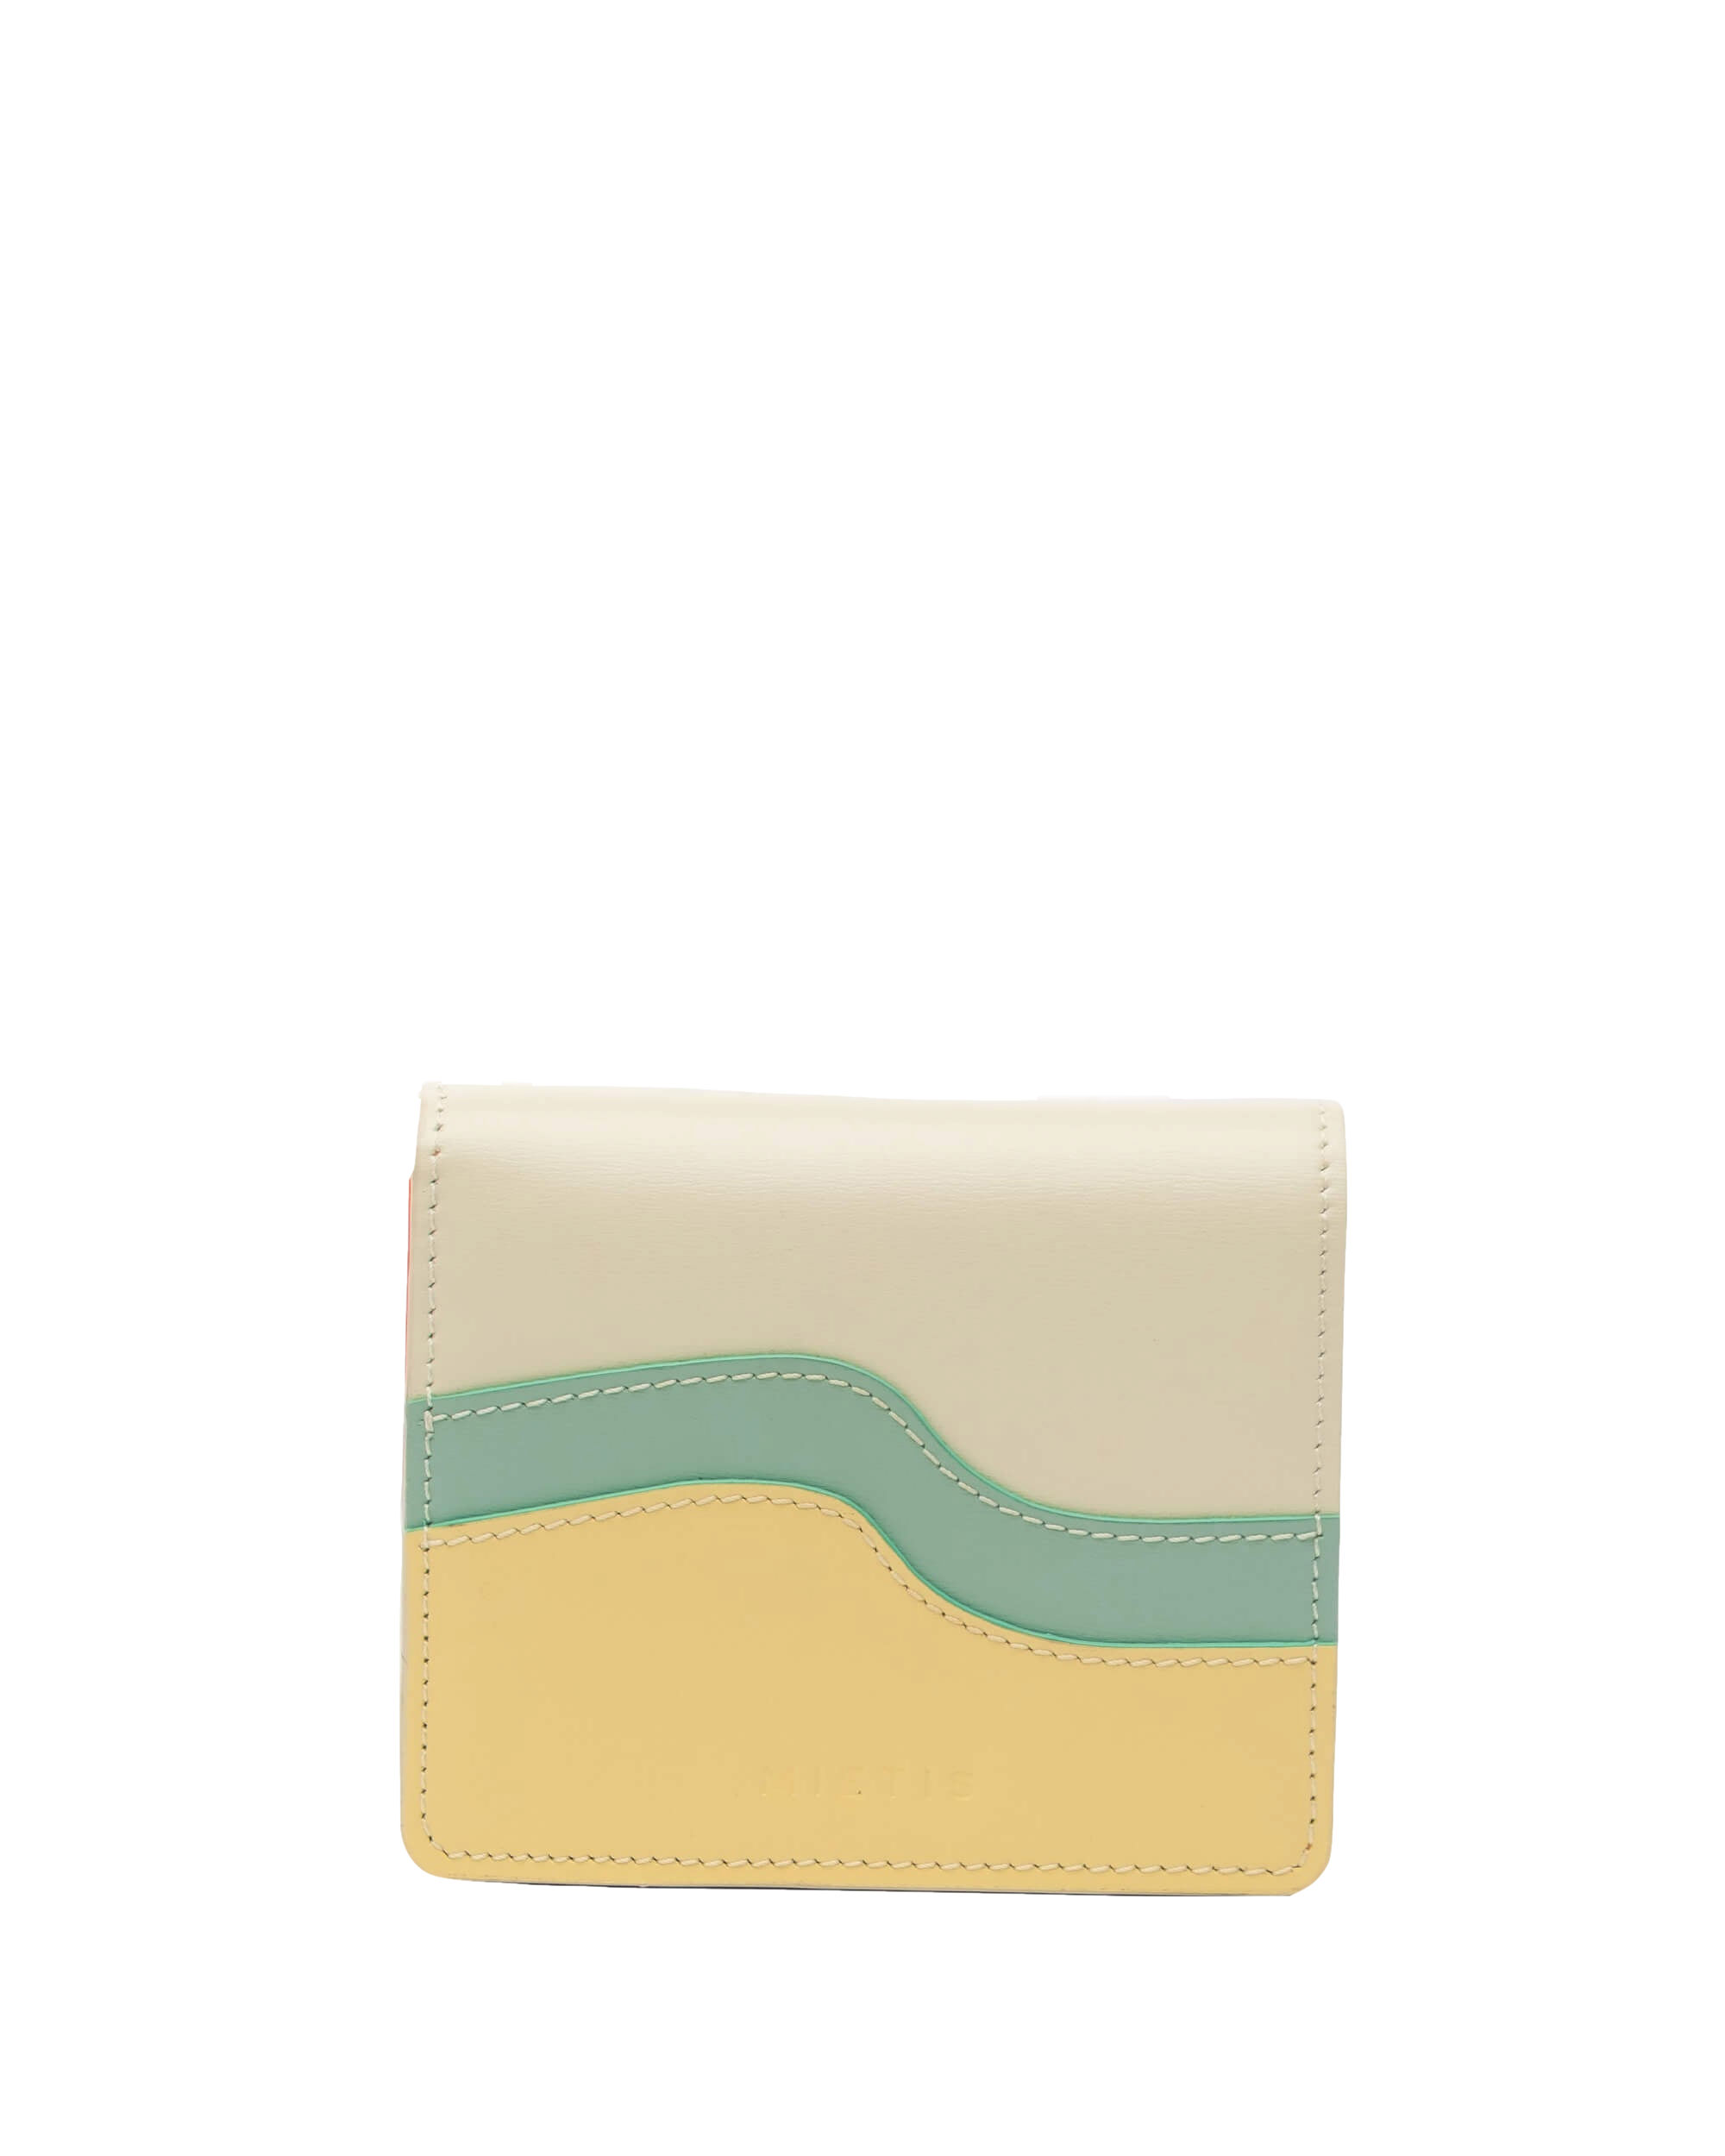 Mietis Waves Wallet White / Cream / Mint Green